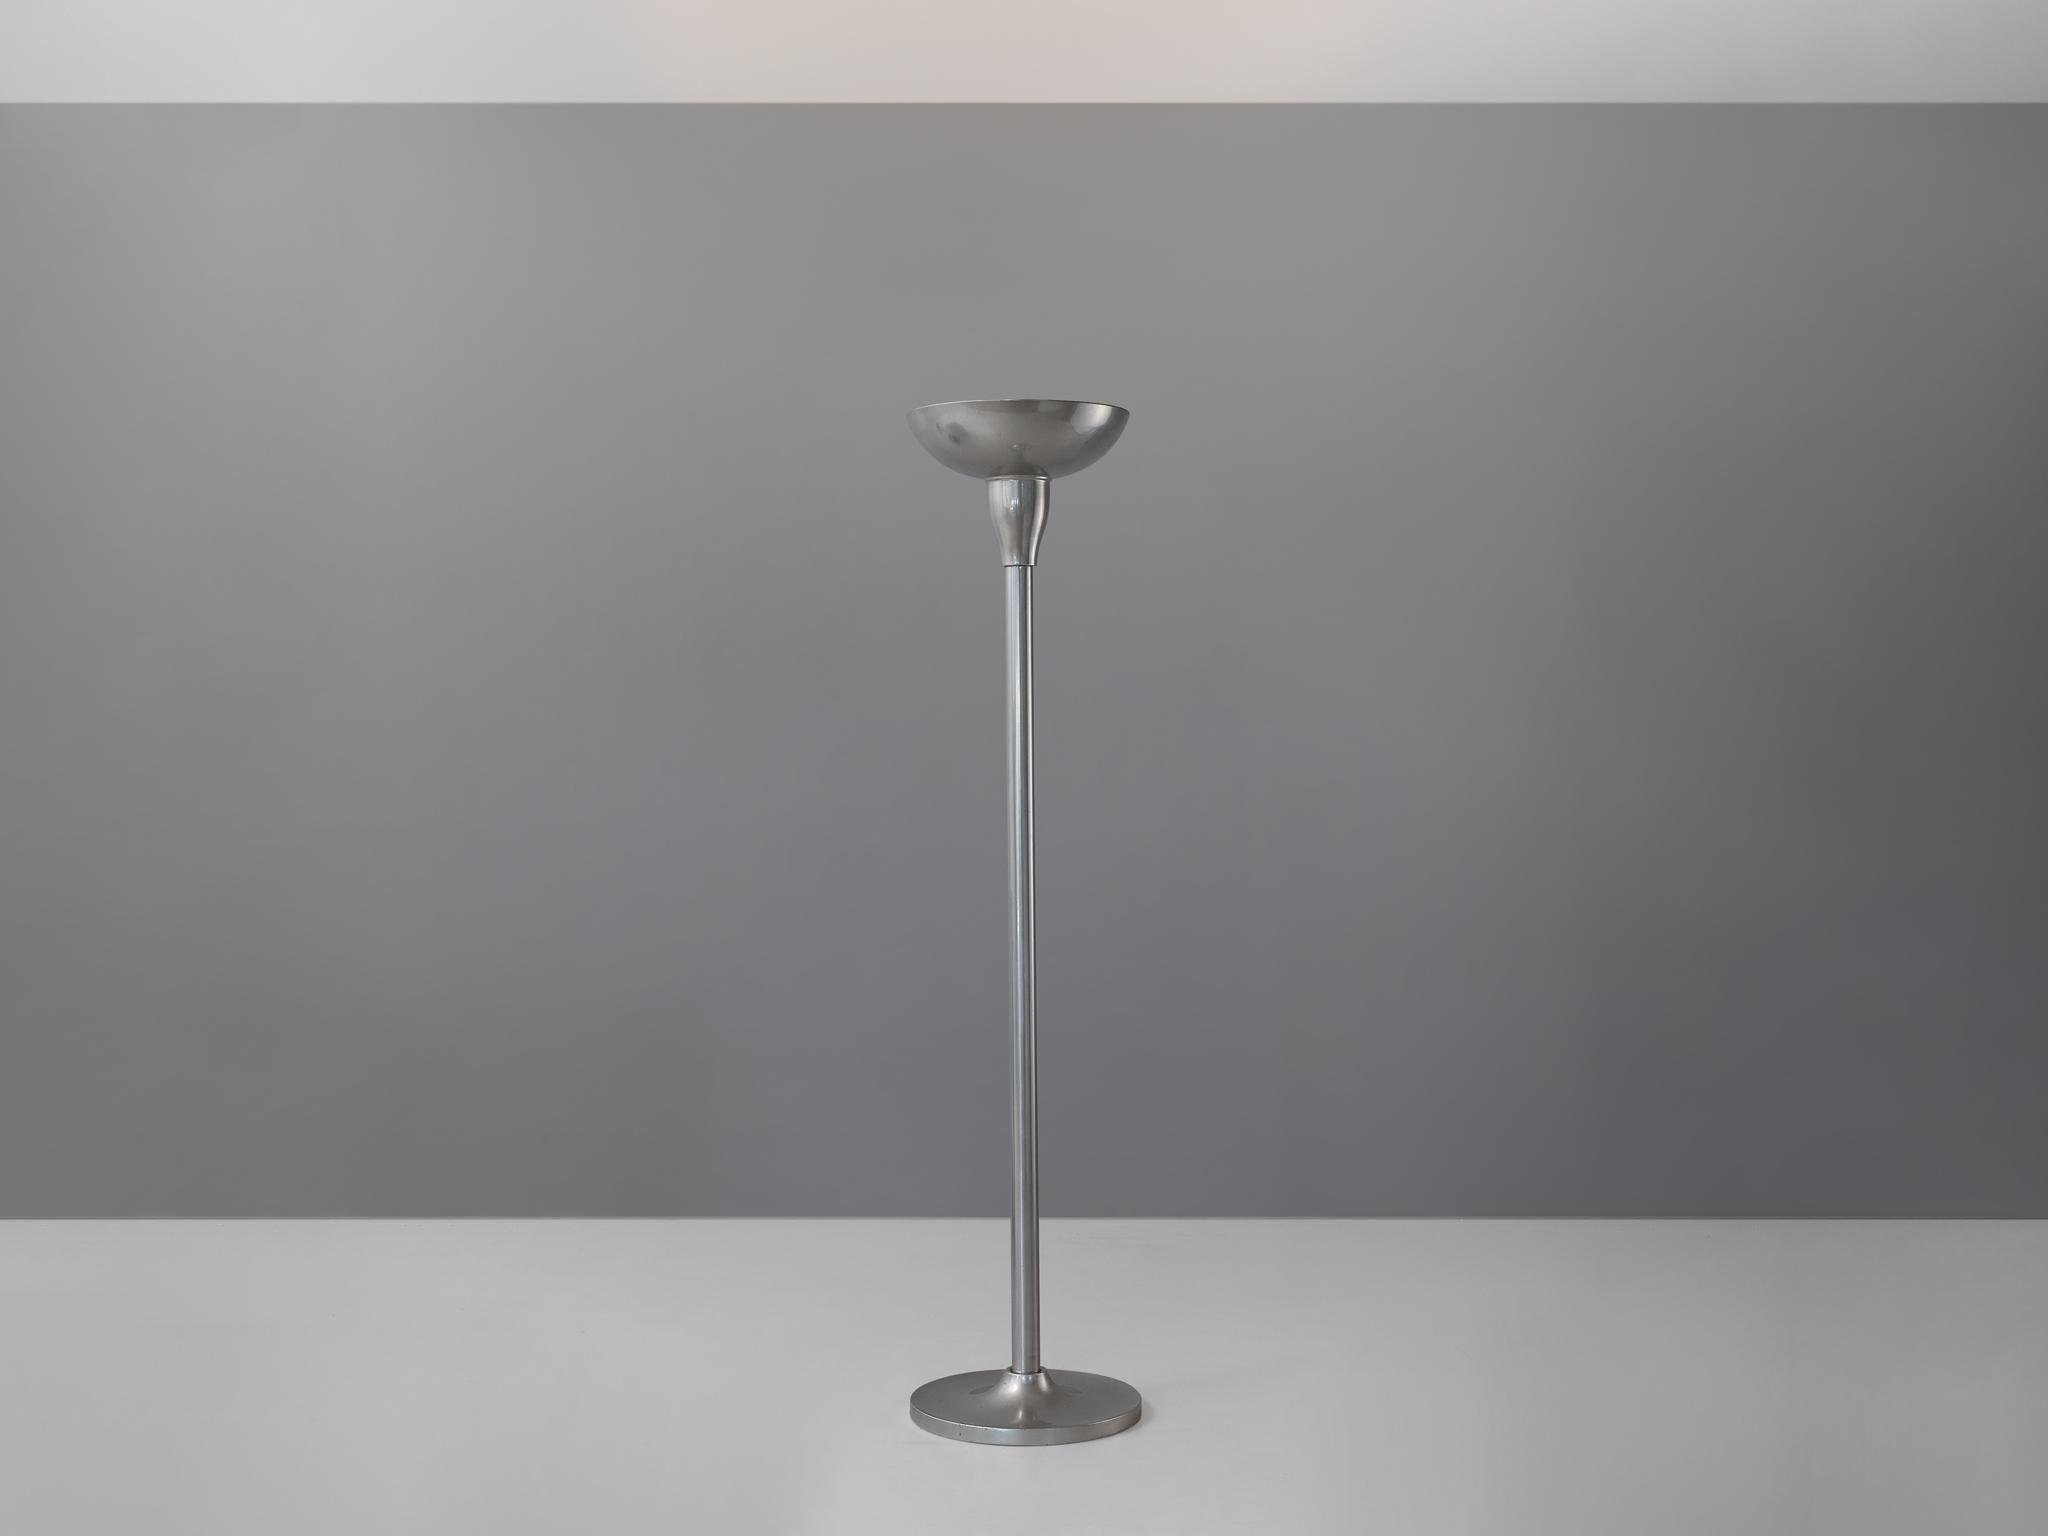 Floor lamp, Aluminum, France, 1930s 

This delicate floor lamp undoubtedly breathes the Art Deco Period of the 1930s and reminds of the designs by Jean Pascaud and Jean Perzel. The design convinces visually through the material that has been used